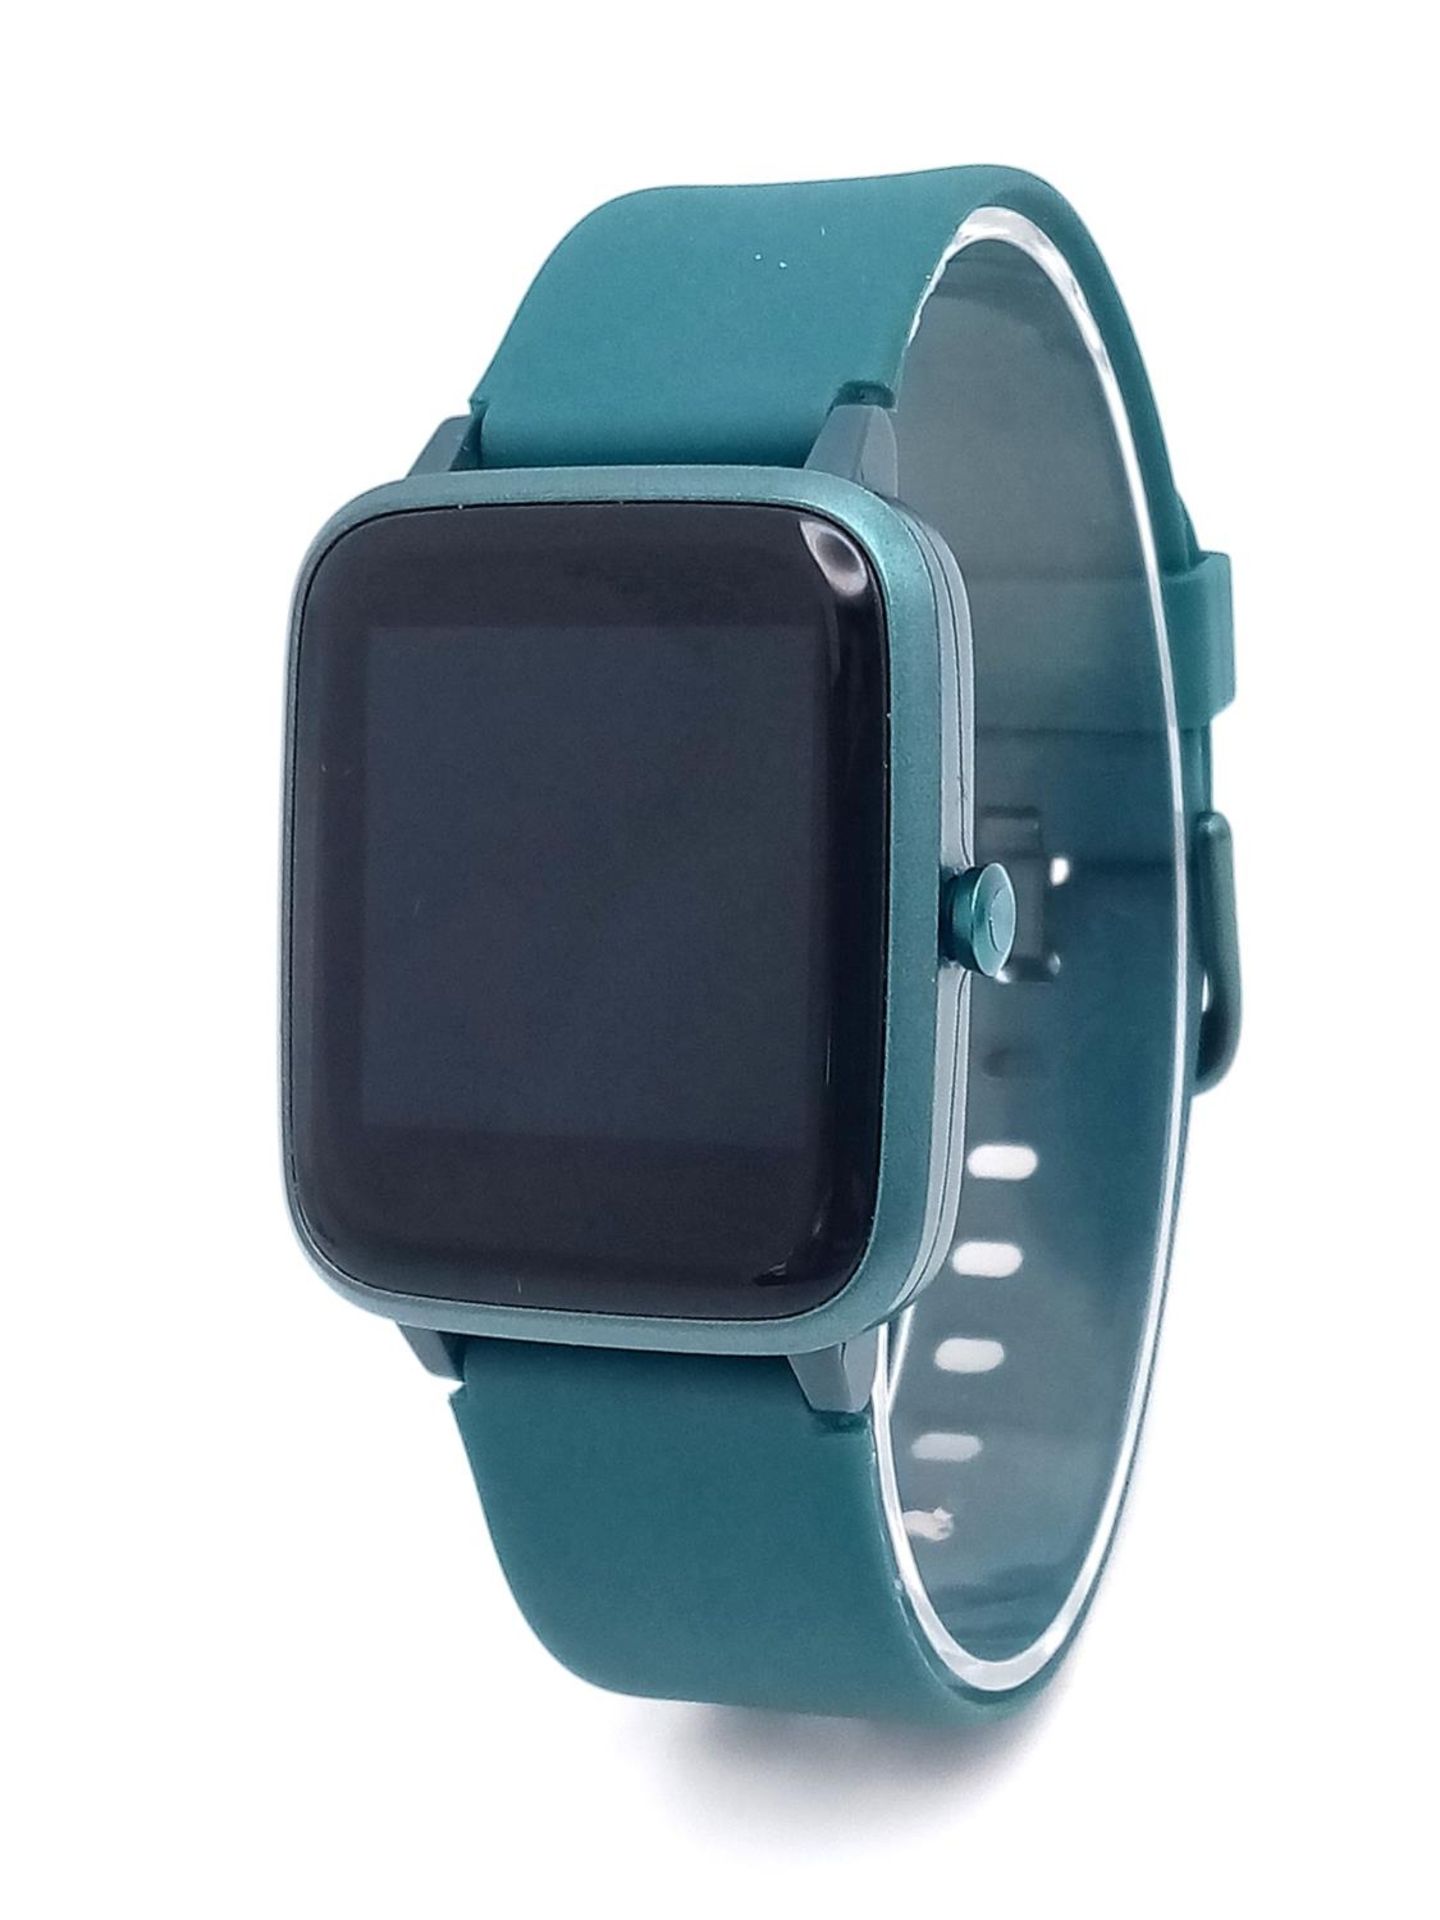 An Android Smart Watch. Works but no guarantees.